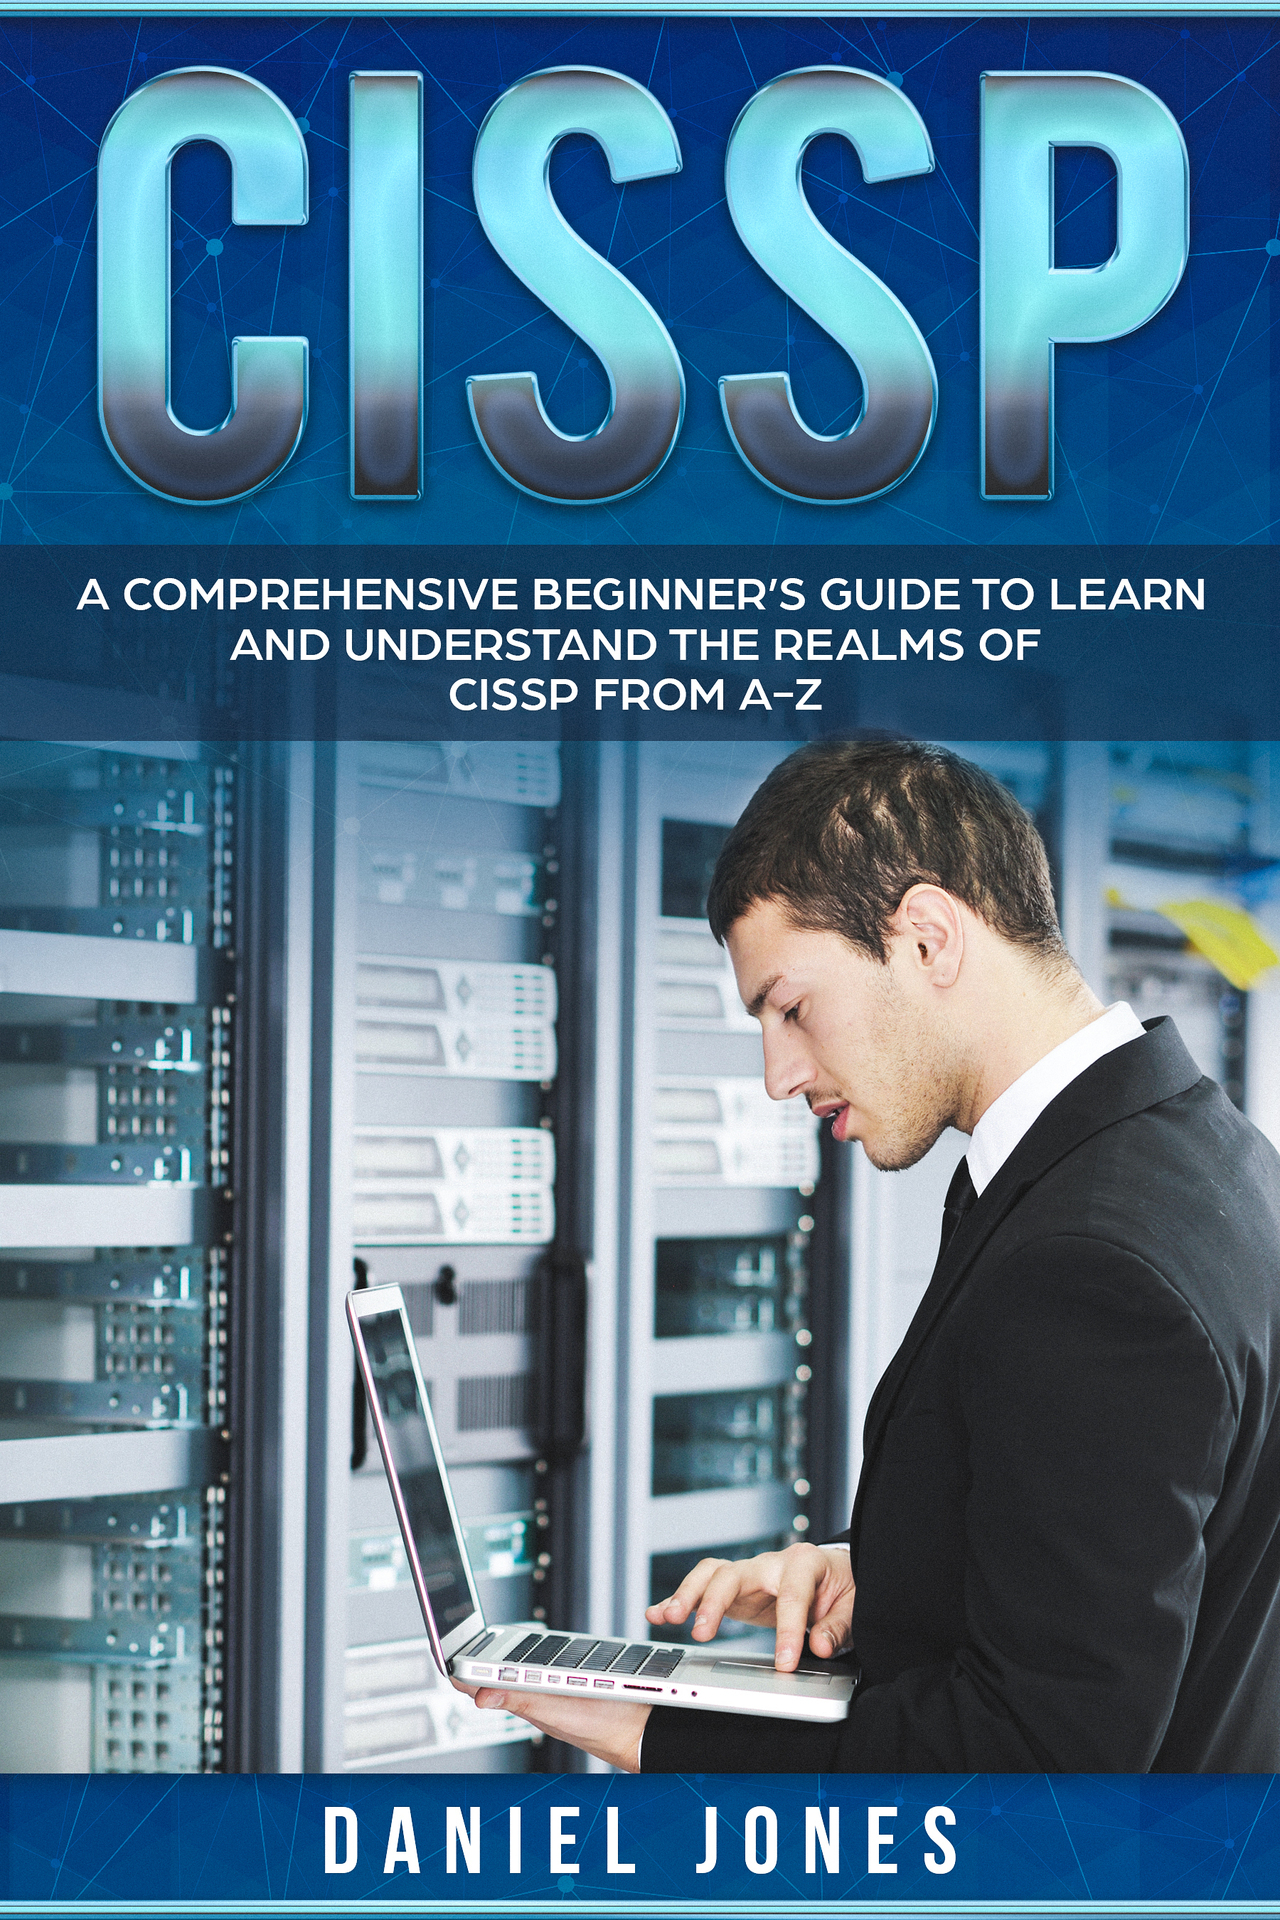 CISSP A Comprehensive Beginners Guide to Learn and Understand the Realms of - photo 1